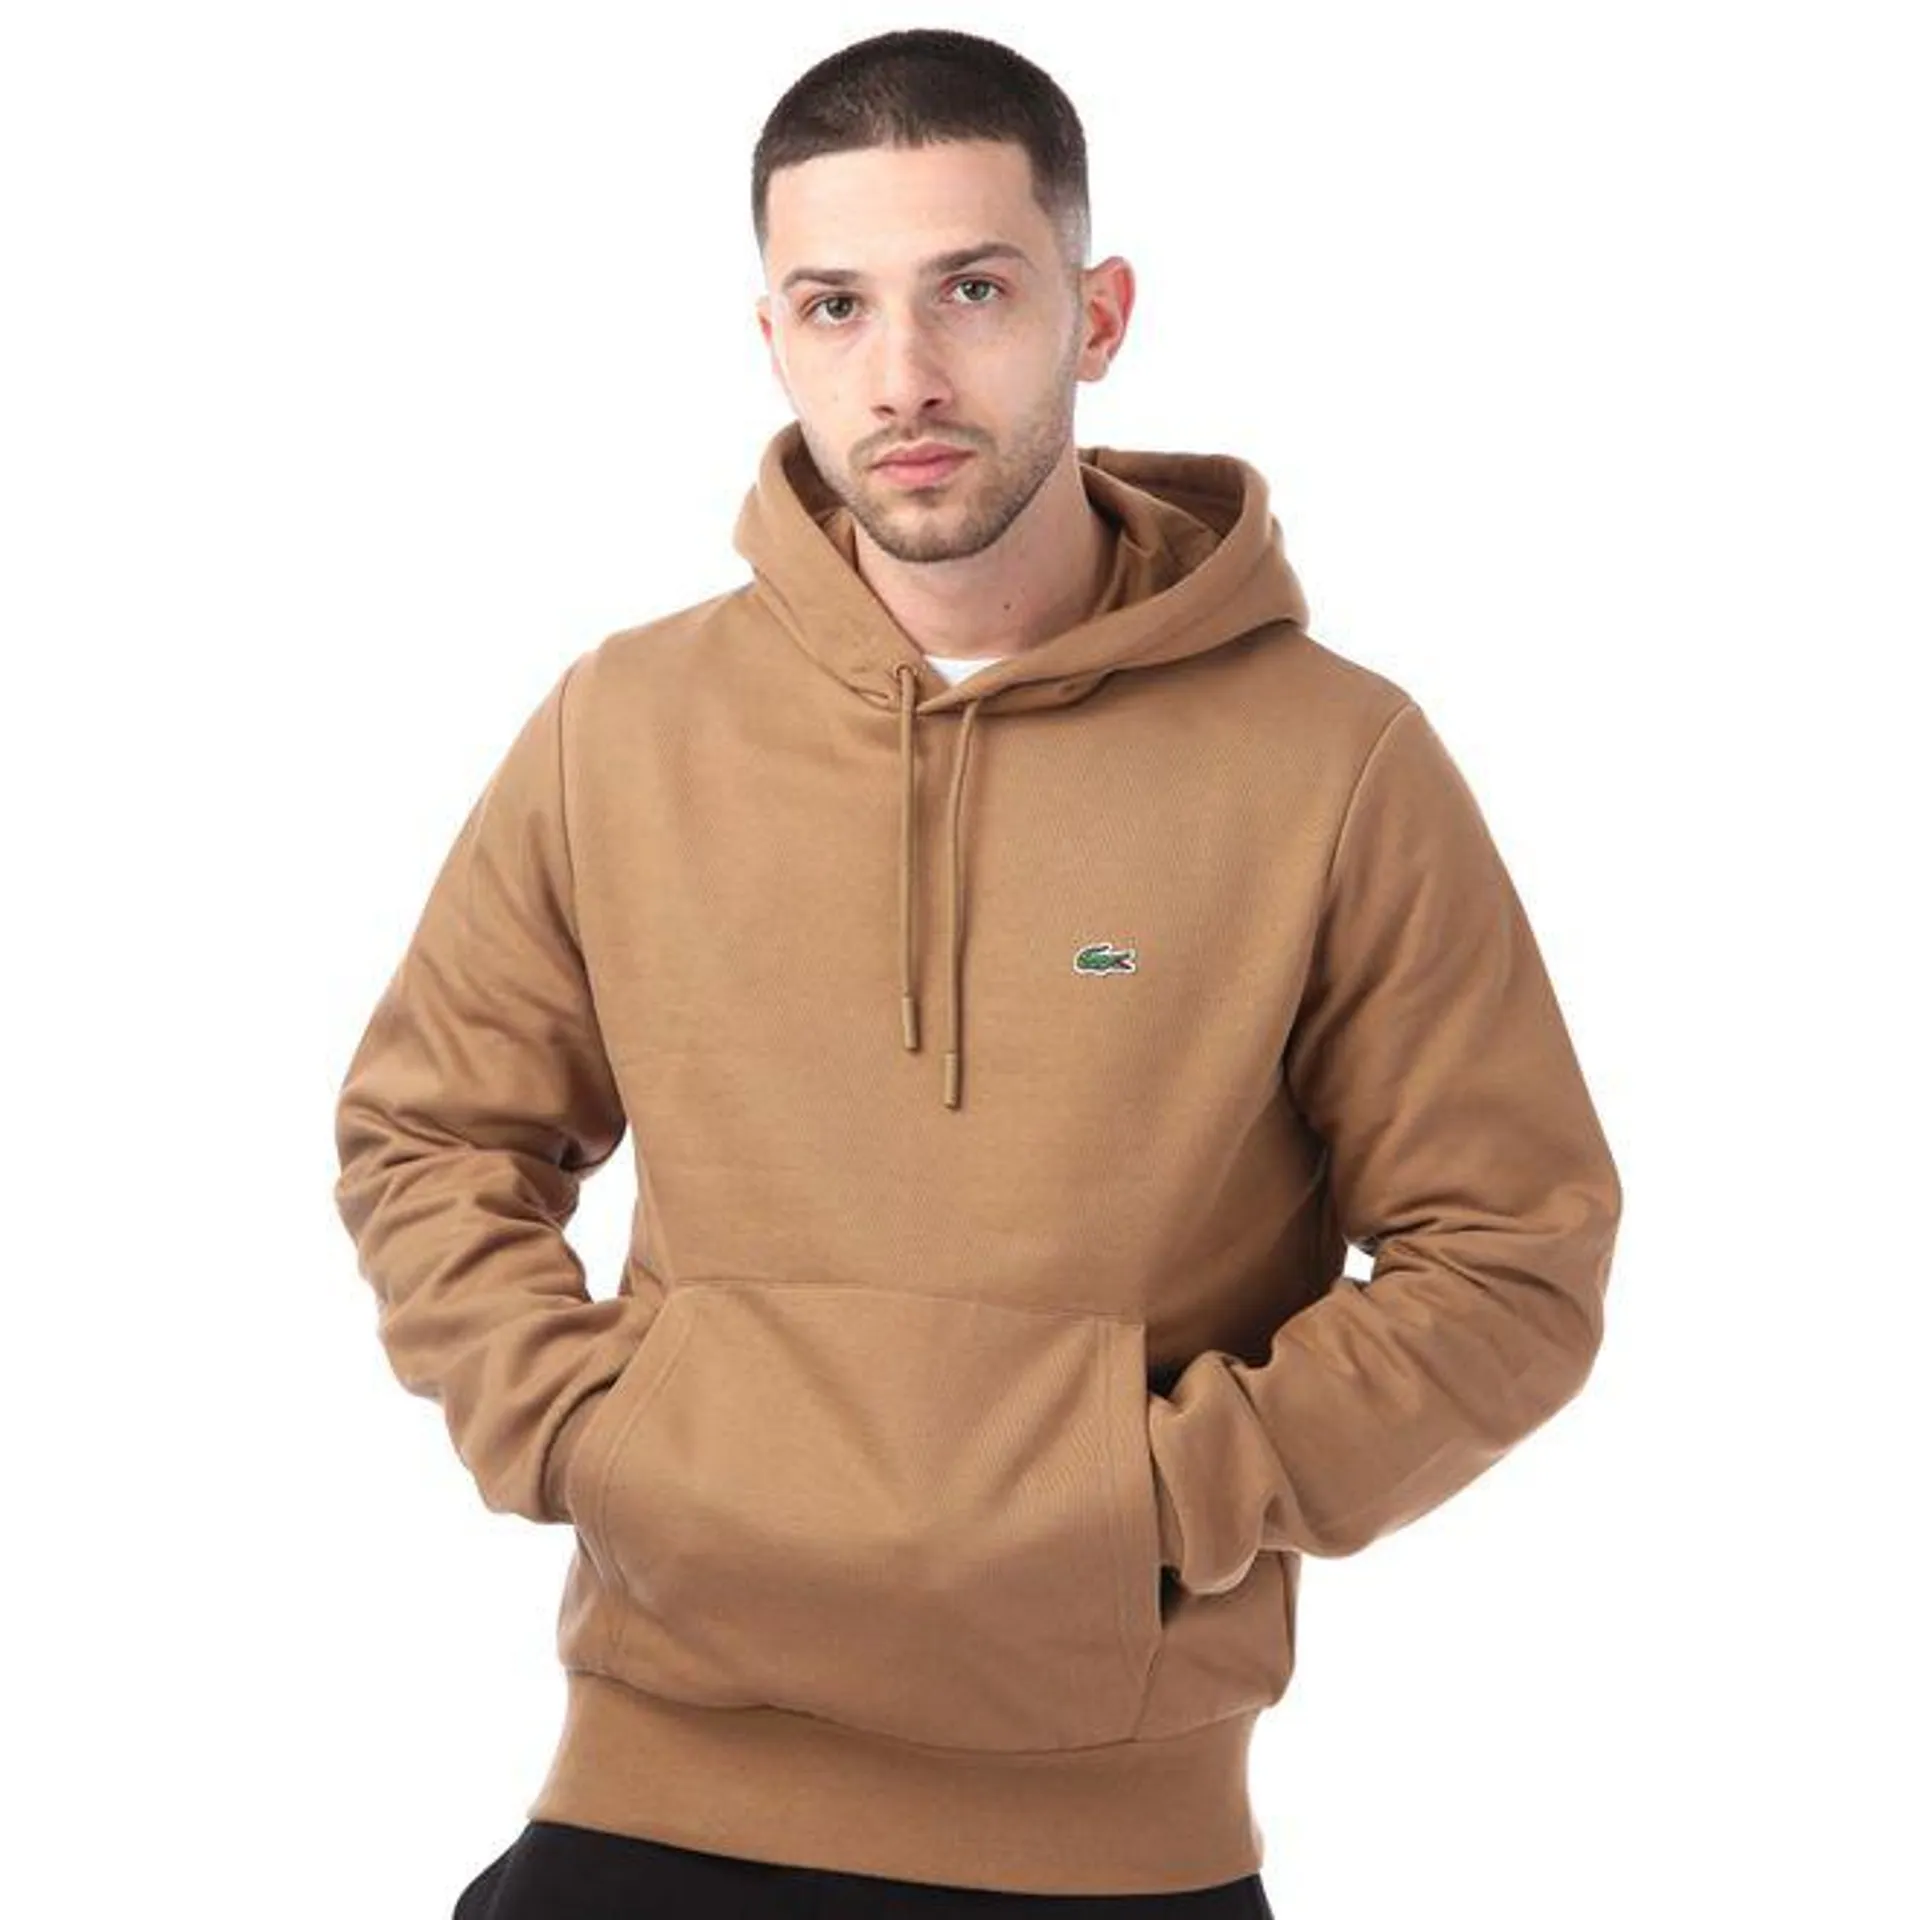 Lacoste Mens Organic Cotton hoody in Brown